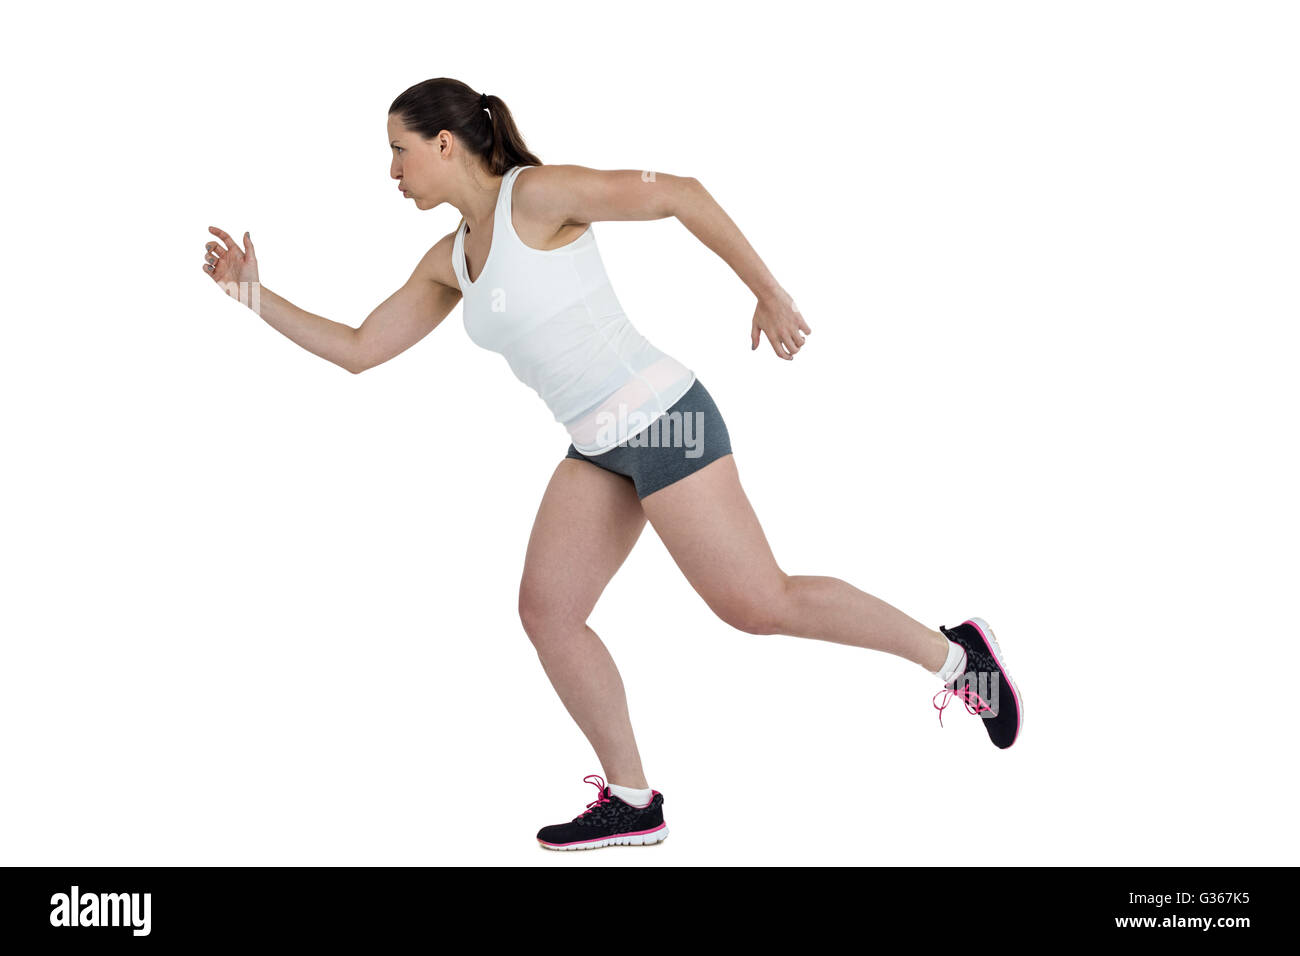 Side view of energetic female athlete running Stock Photo